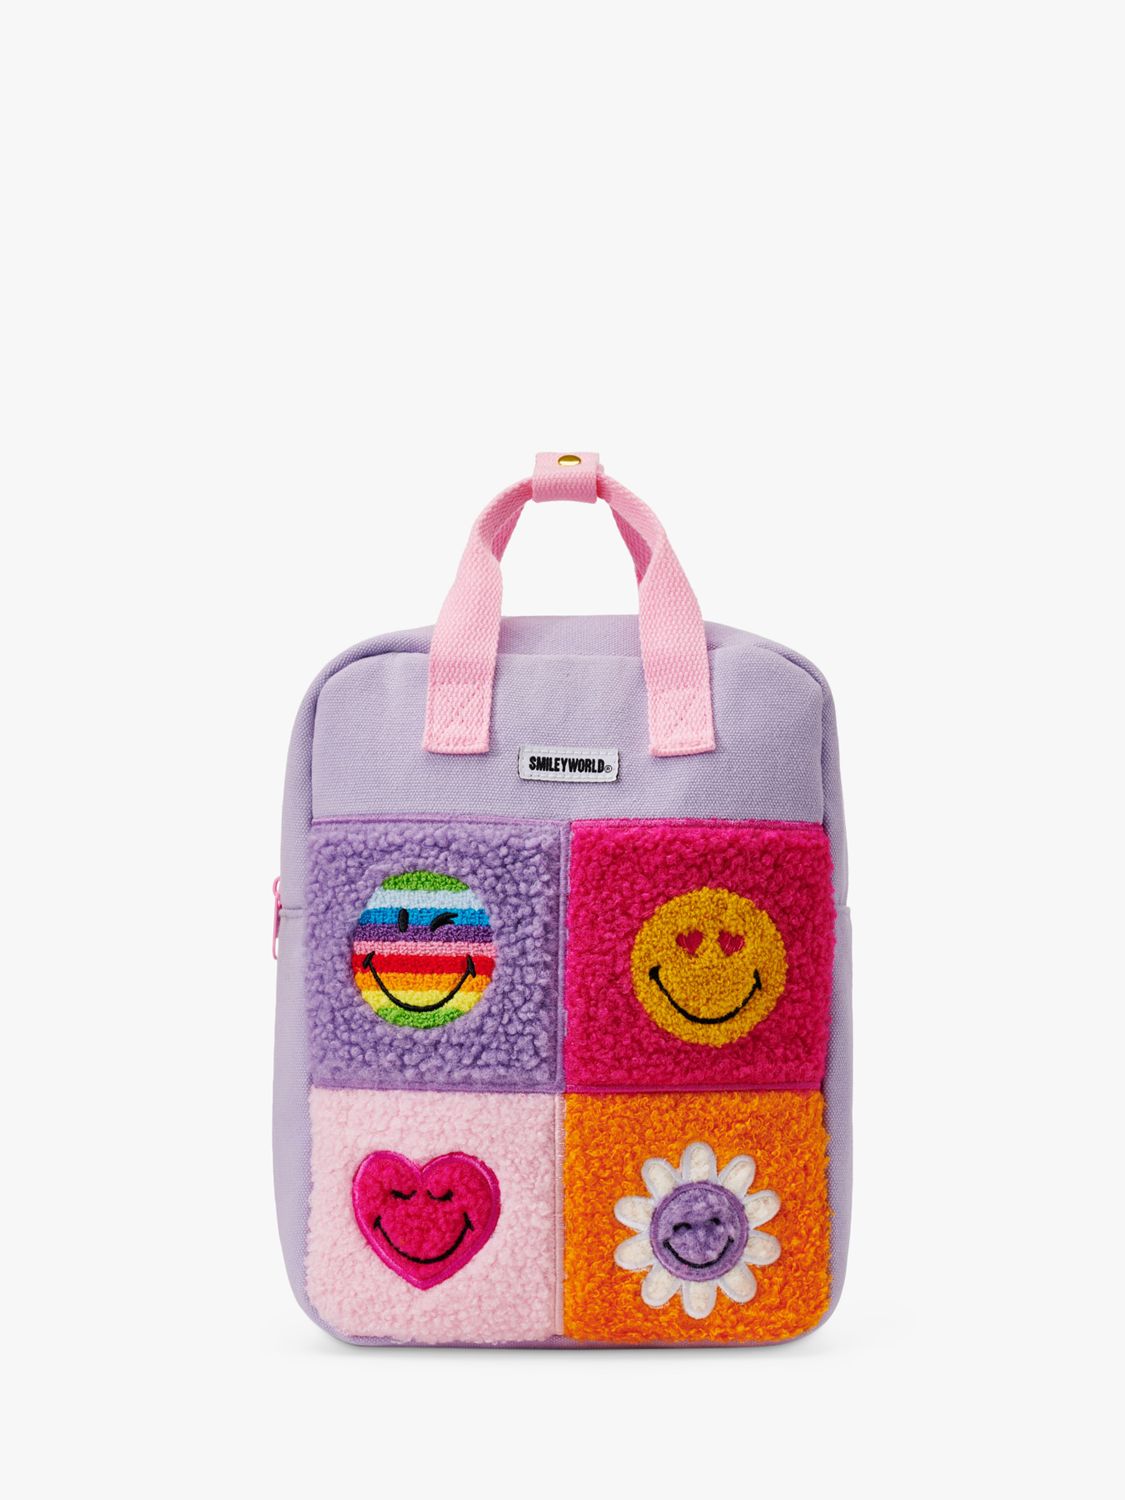 Small Stuff Kids' SMILEYWORLD®️ Faux Fur Patch Backpack, Lilac, One Size